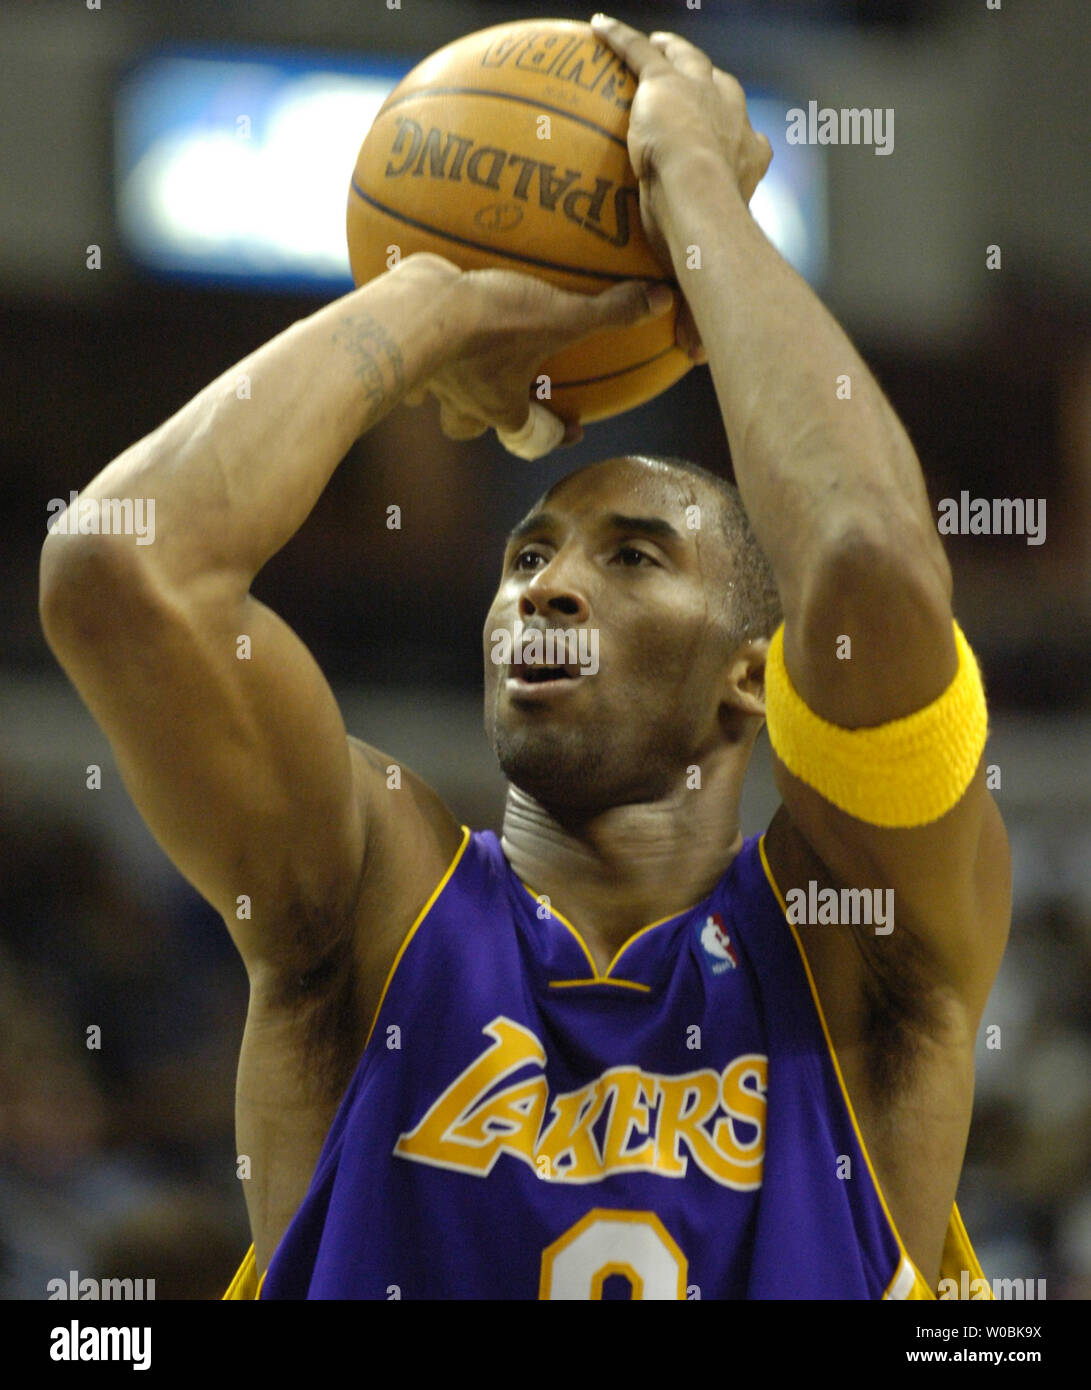 Kobe Bryant (8) of the Los Angeles Lakers shoots and scores against the Washington Wizards on December 26, 2005 in the fourth quarter at the MCI Center in  Washington, D.C.  The Wizards defeated the Lakers 94-91.   (UPI Photo/Mark Goldman) Stock Photo